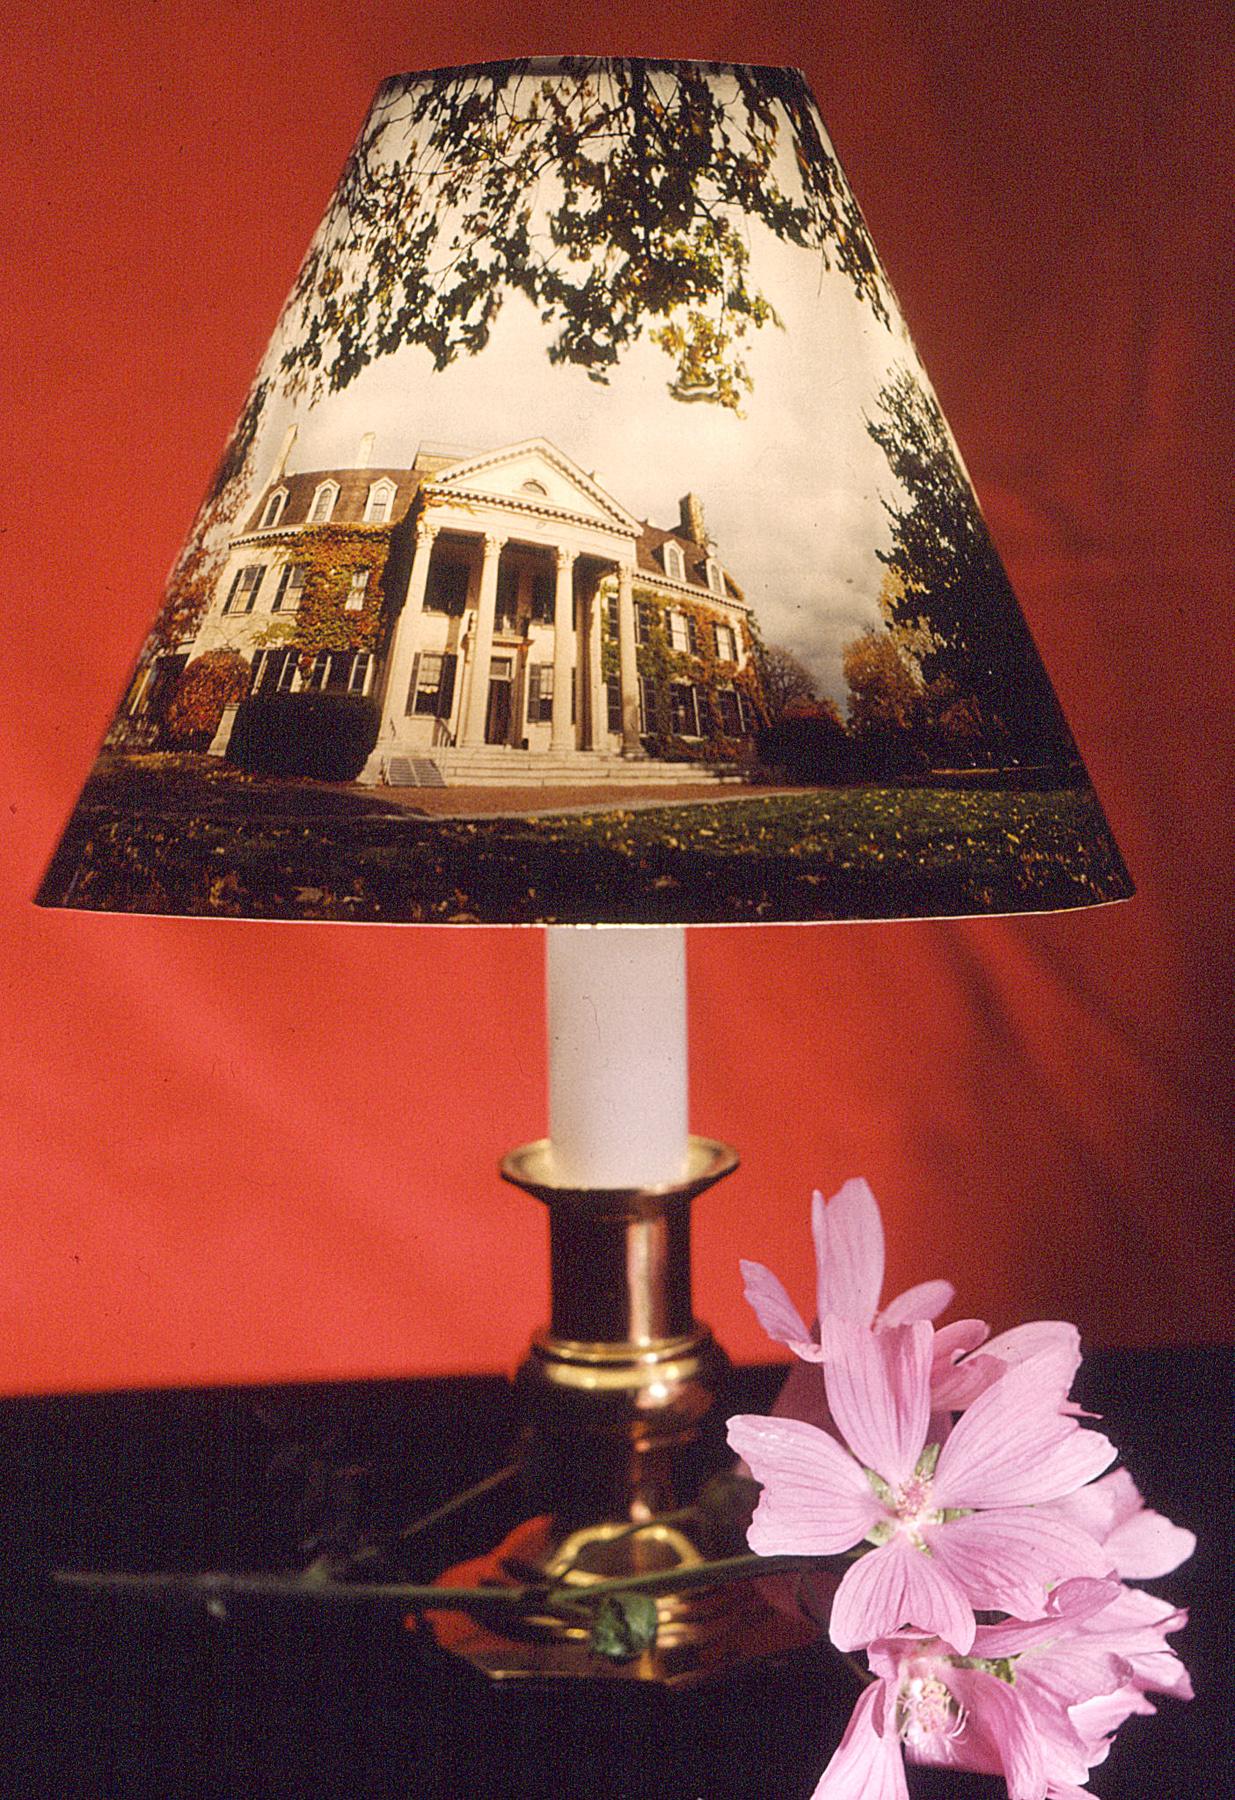 Image for entry 'Conical lampshade based on a 360 degree view of the George Eatman House grounds'